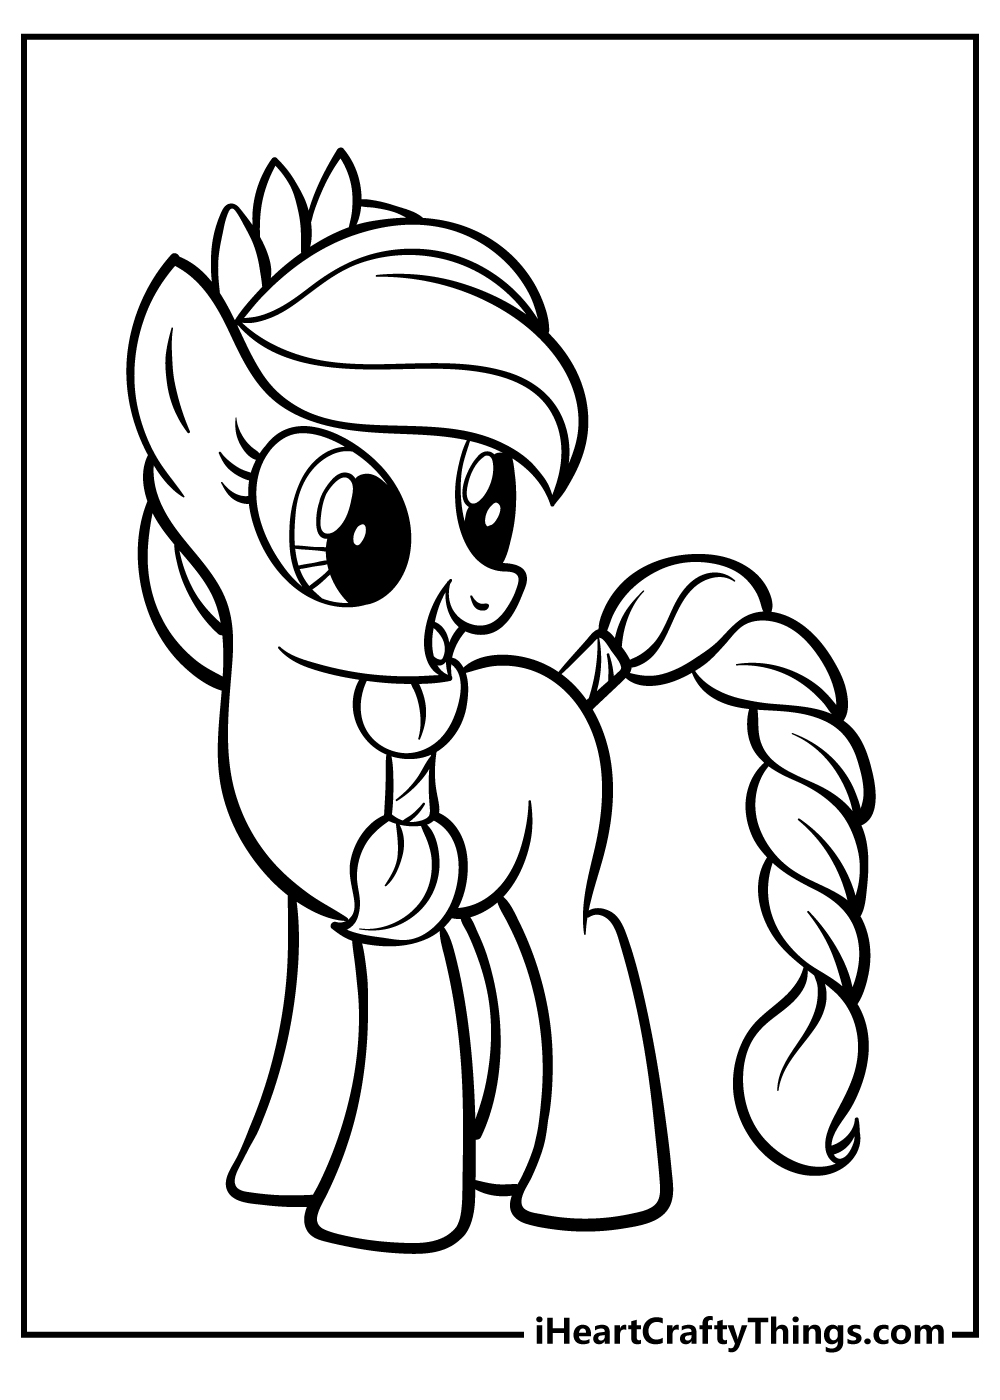 Rainbow Dash Coloring Sheet for children free download